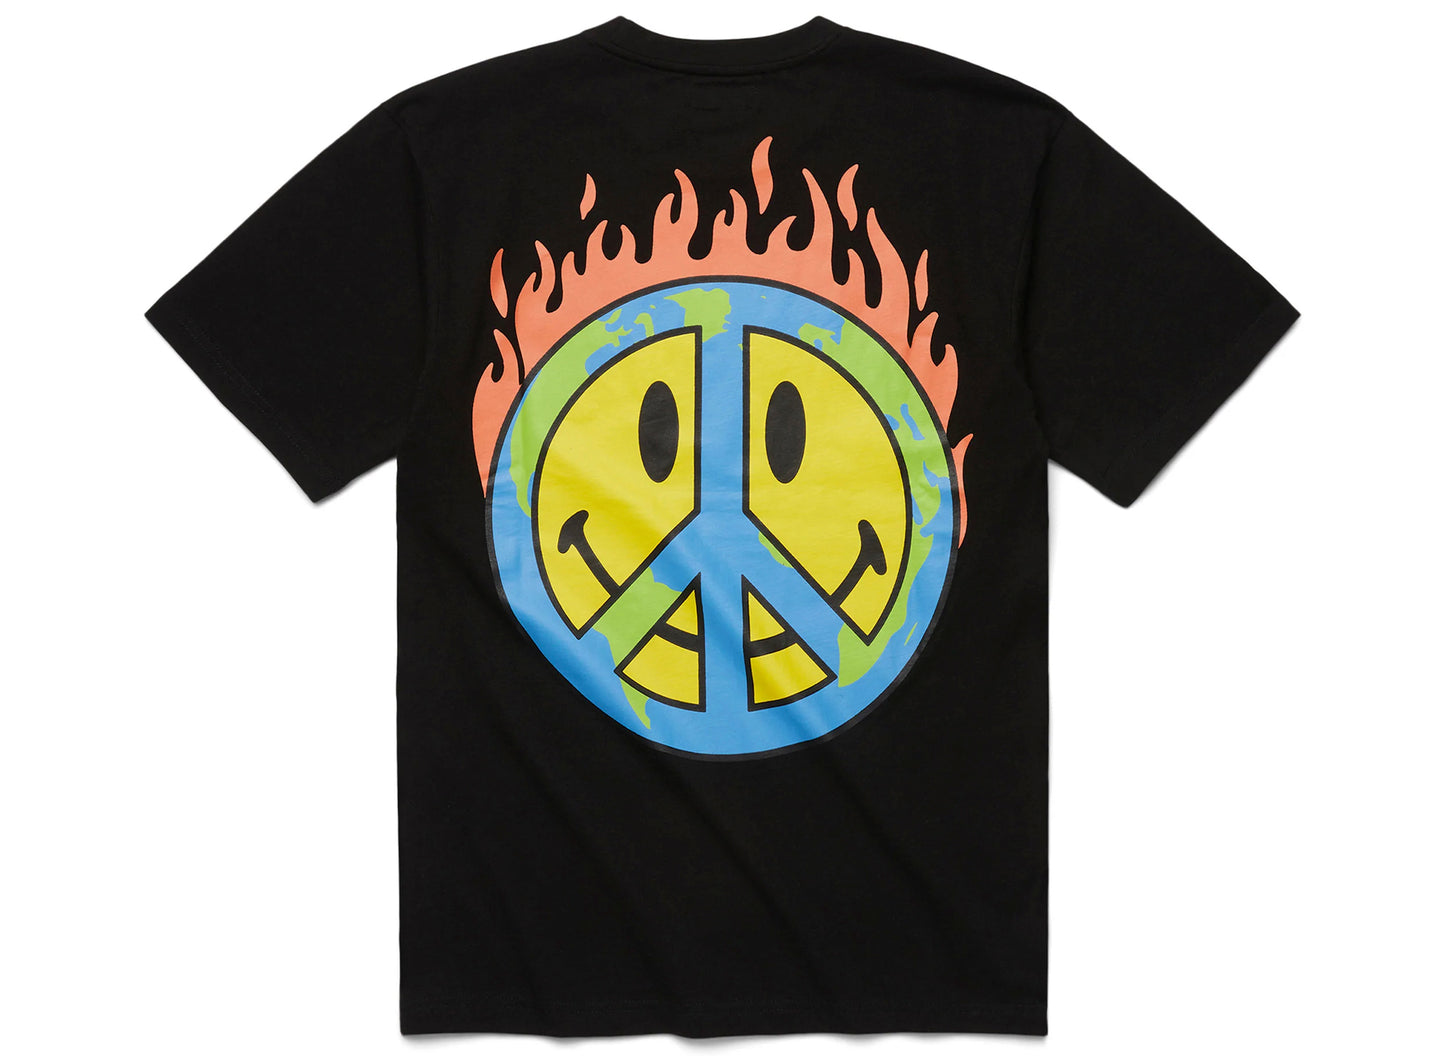 Market Smiley Earth on Fire Tee